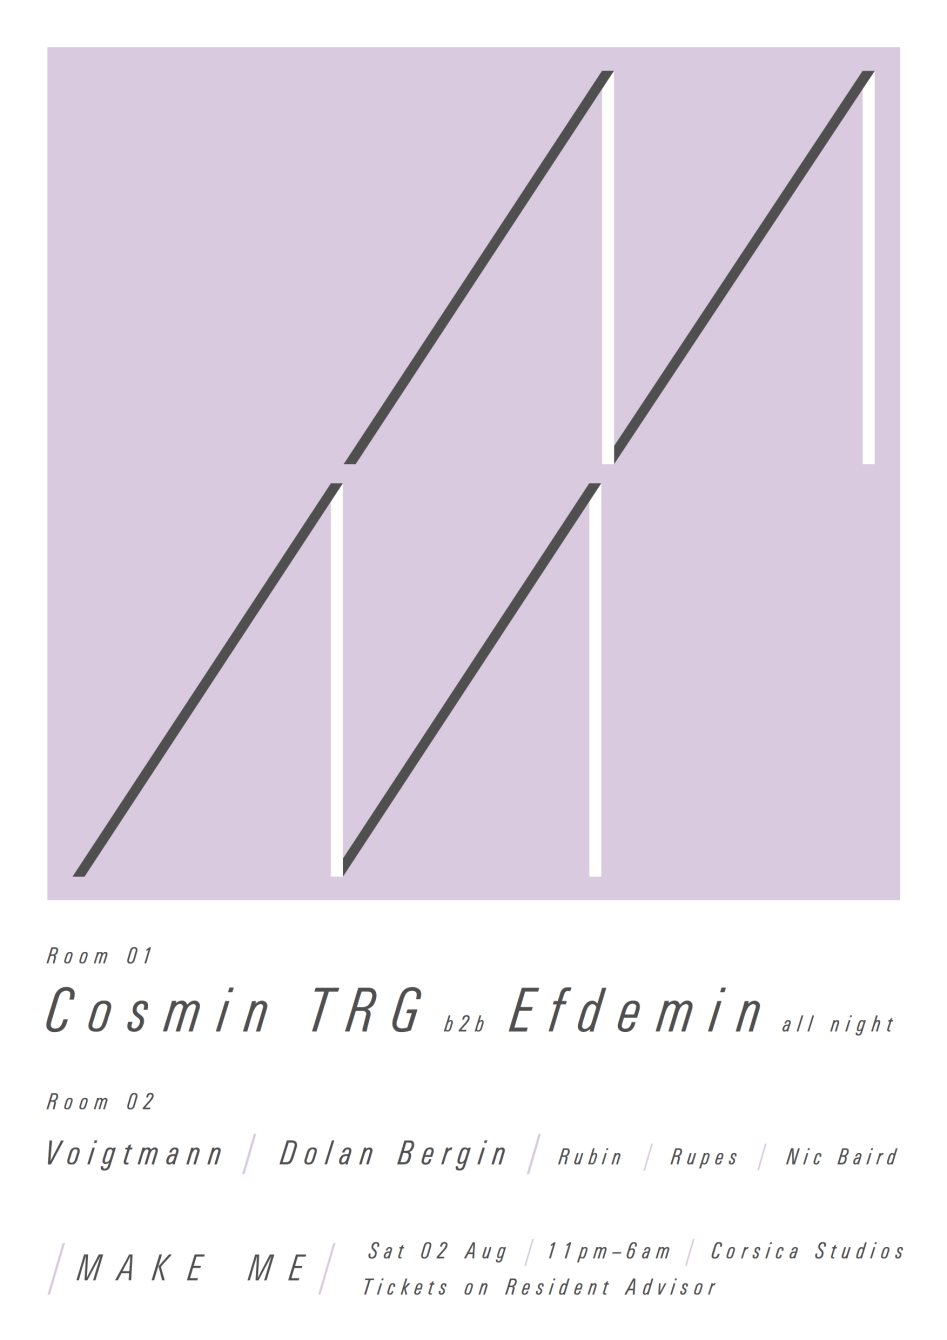 Make Me with Cosmin TRG b2b Efdemin all Night - Flyer front